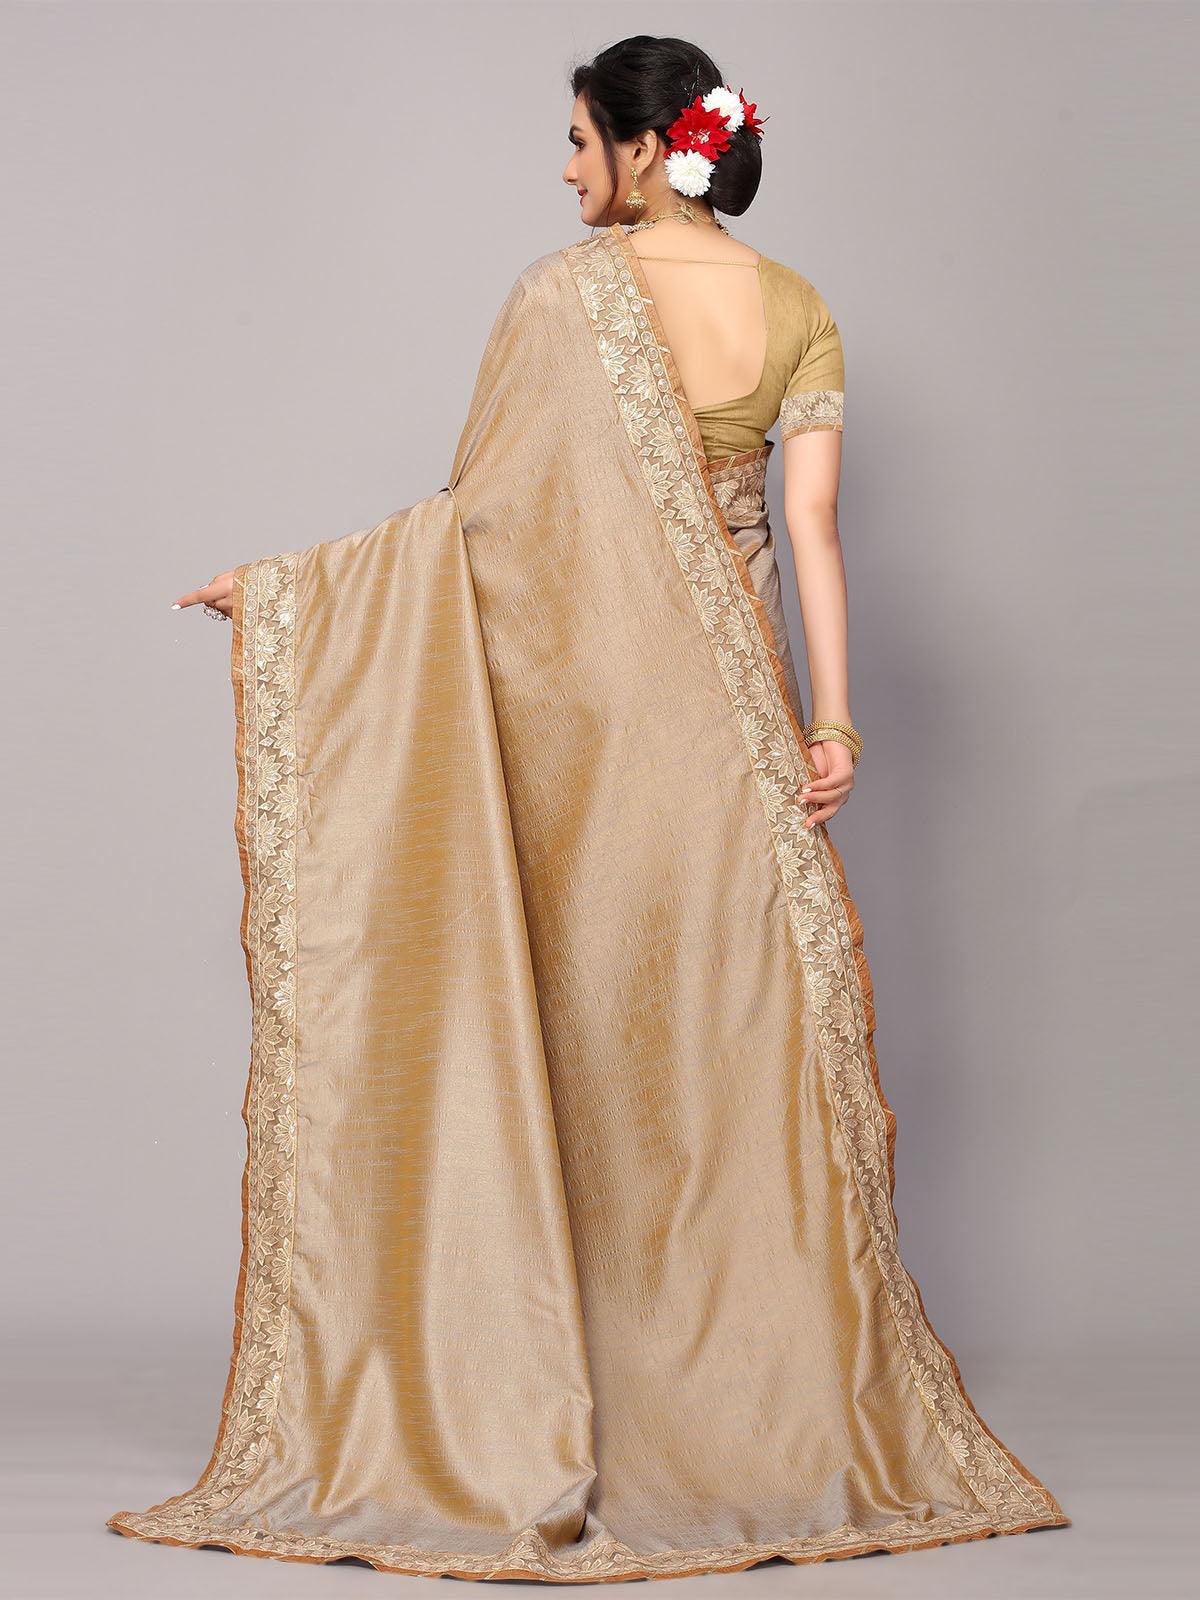 Women's Dusty Brown Satin Silk Embroidery Border Work Saree With Blouse. - Odette